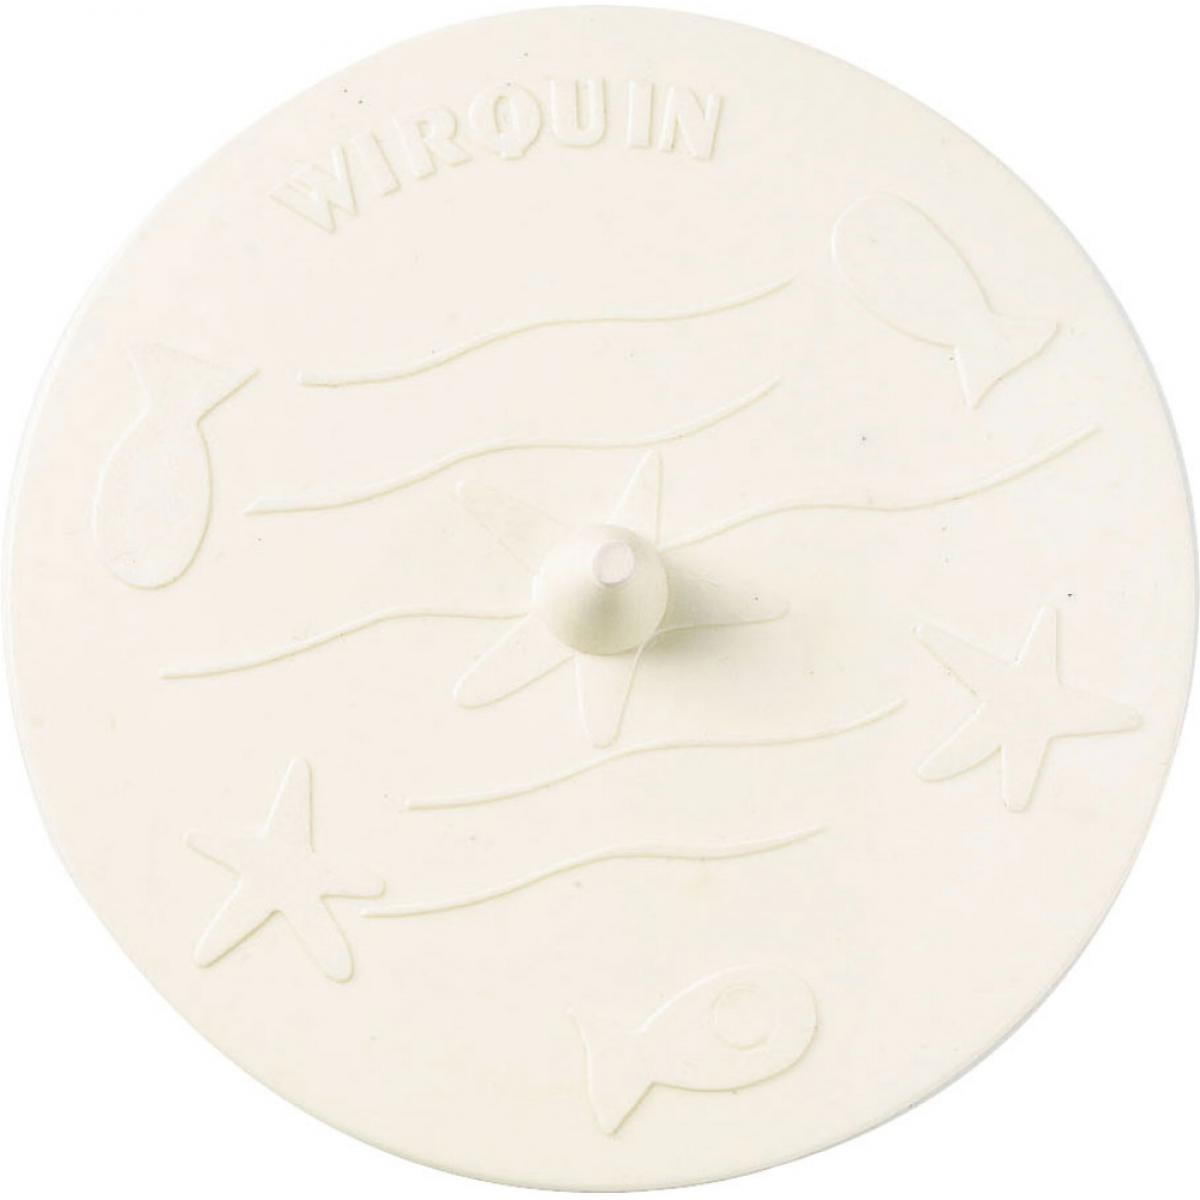 Wirquin - Bouchon universel Wirquin blanc - Chasse d'eau